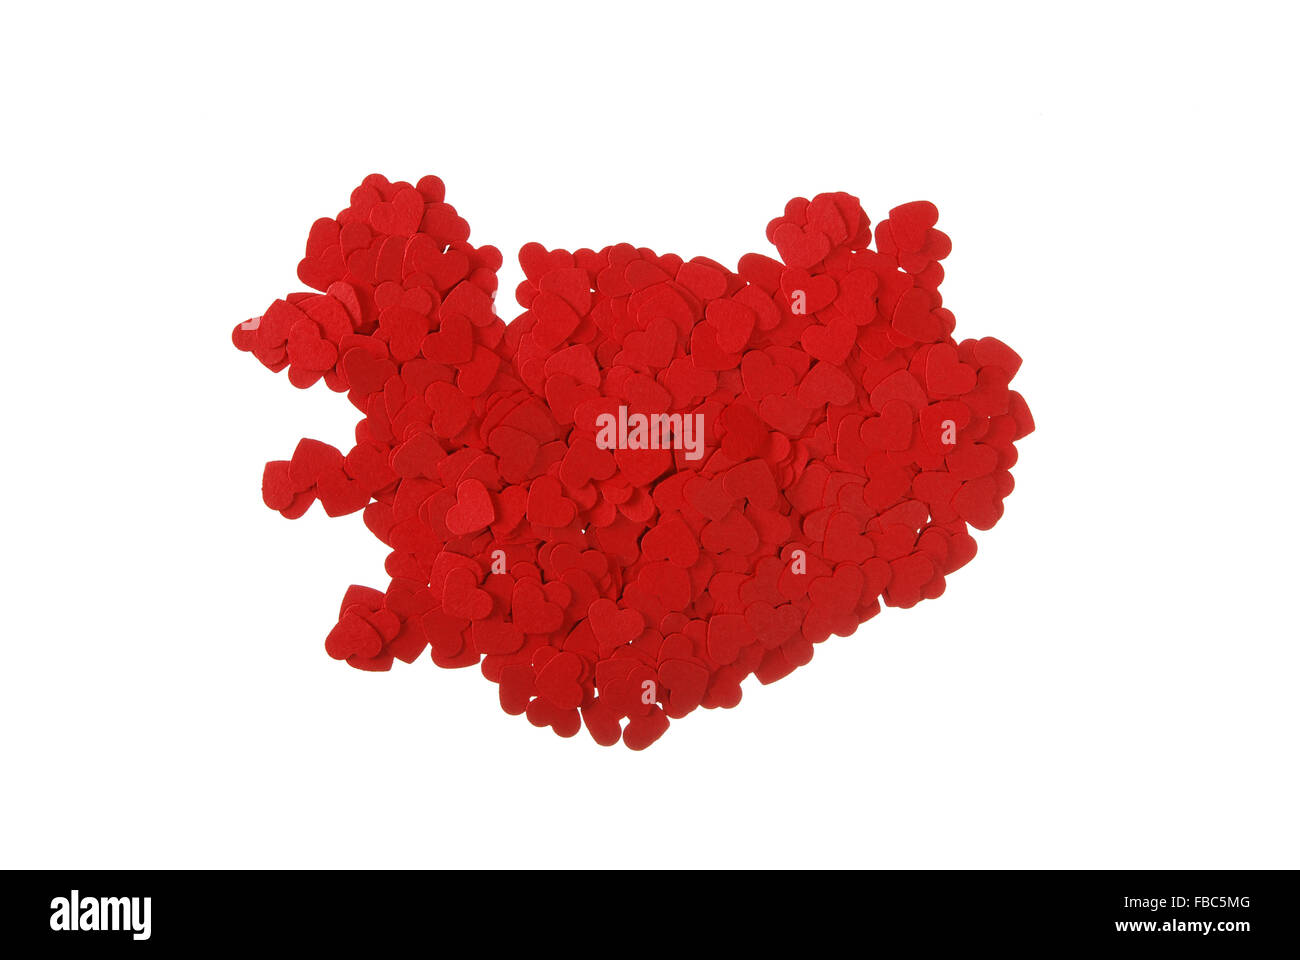 contour of the Iceland built of small red hearts on a white background Stock Photo